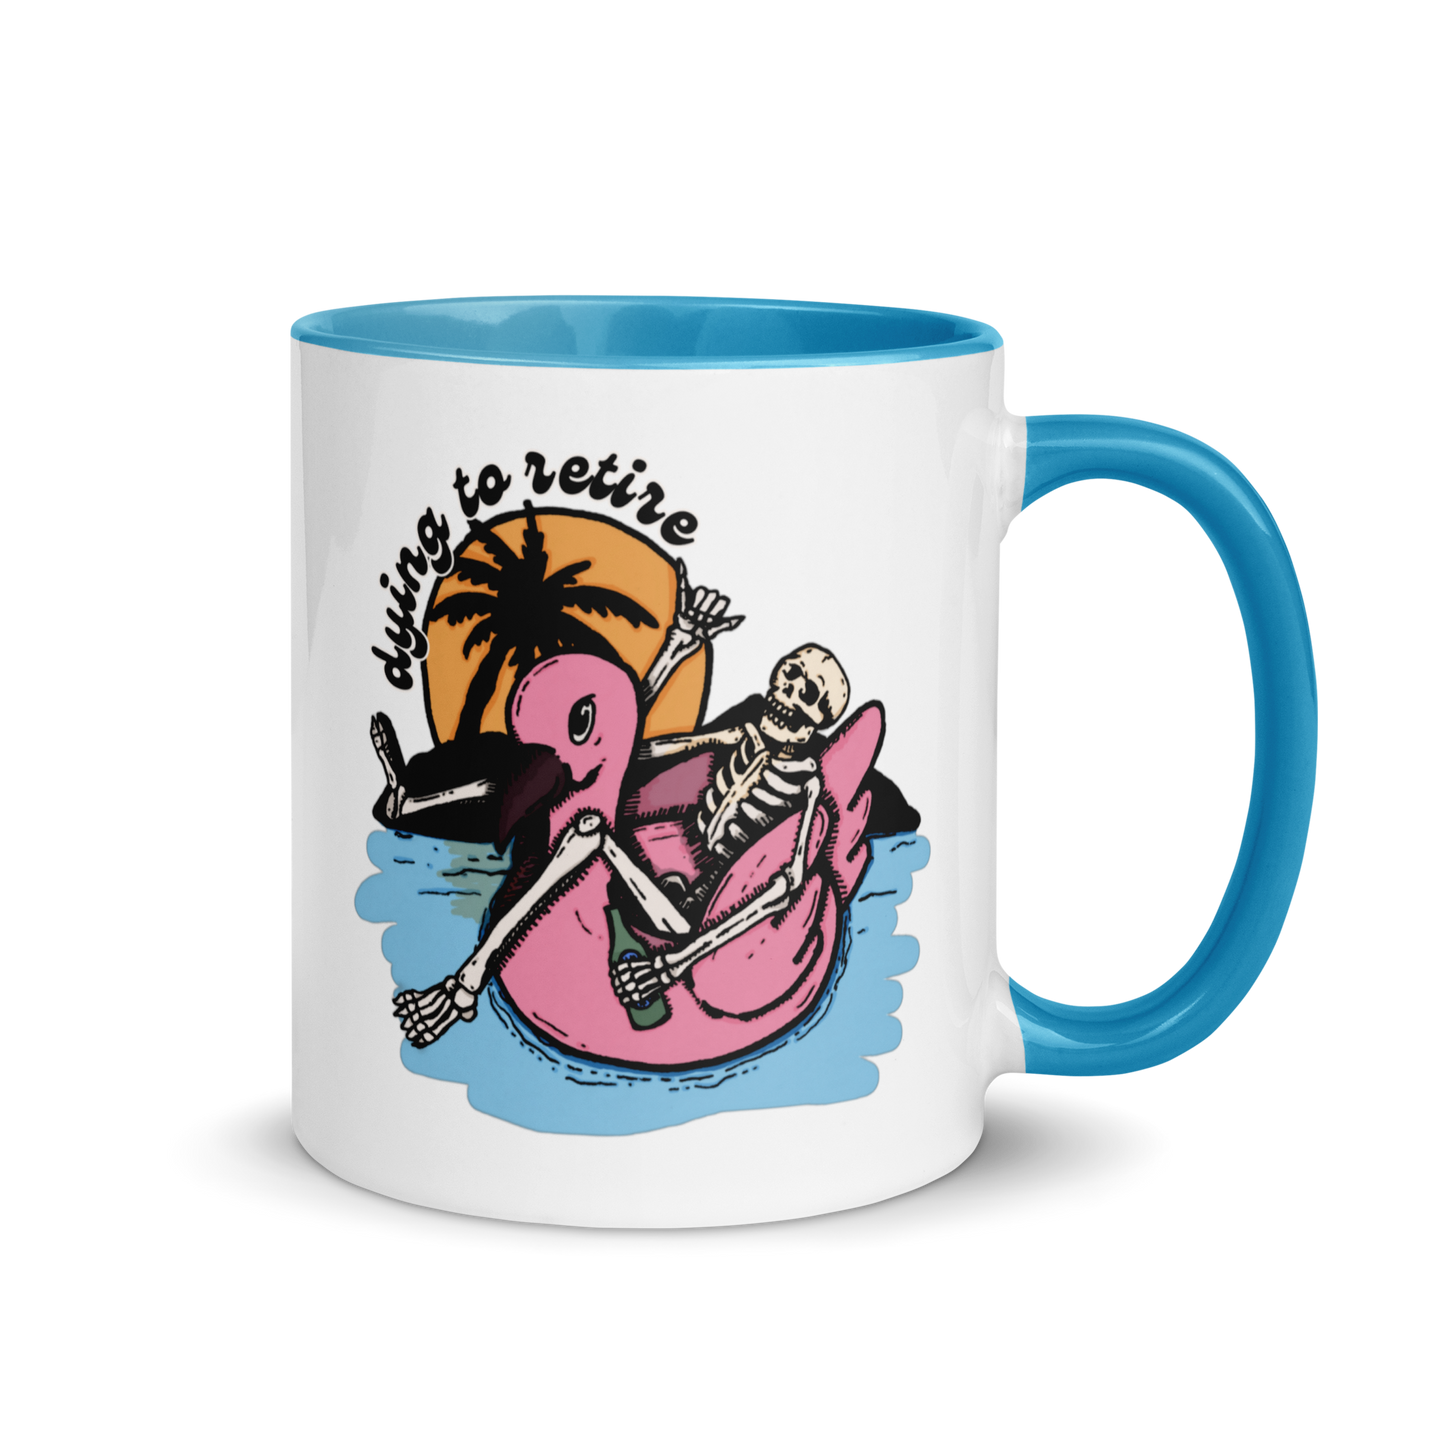 dying to retire mug, right handle - gaslit apparel